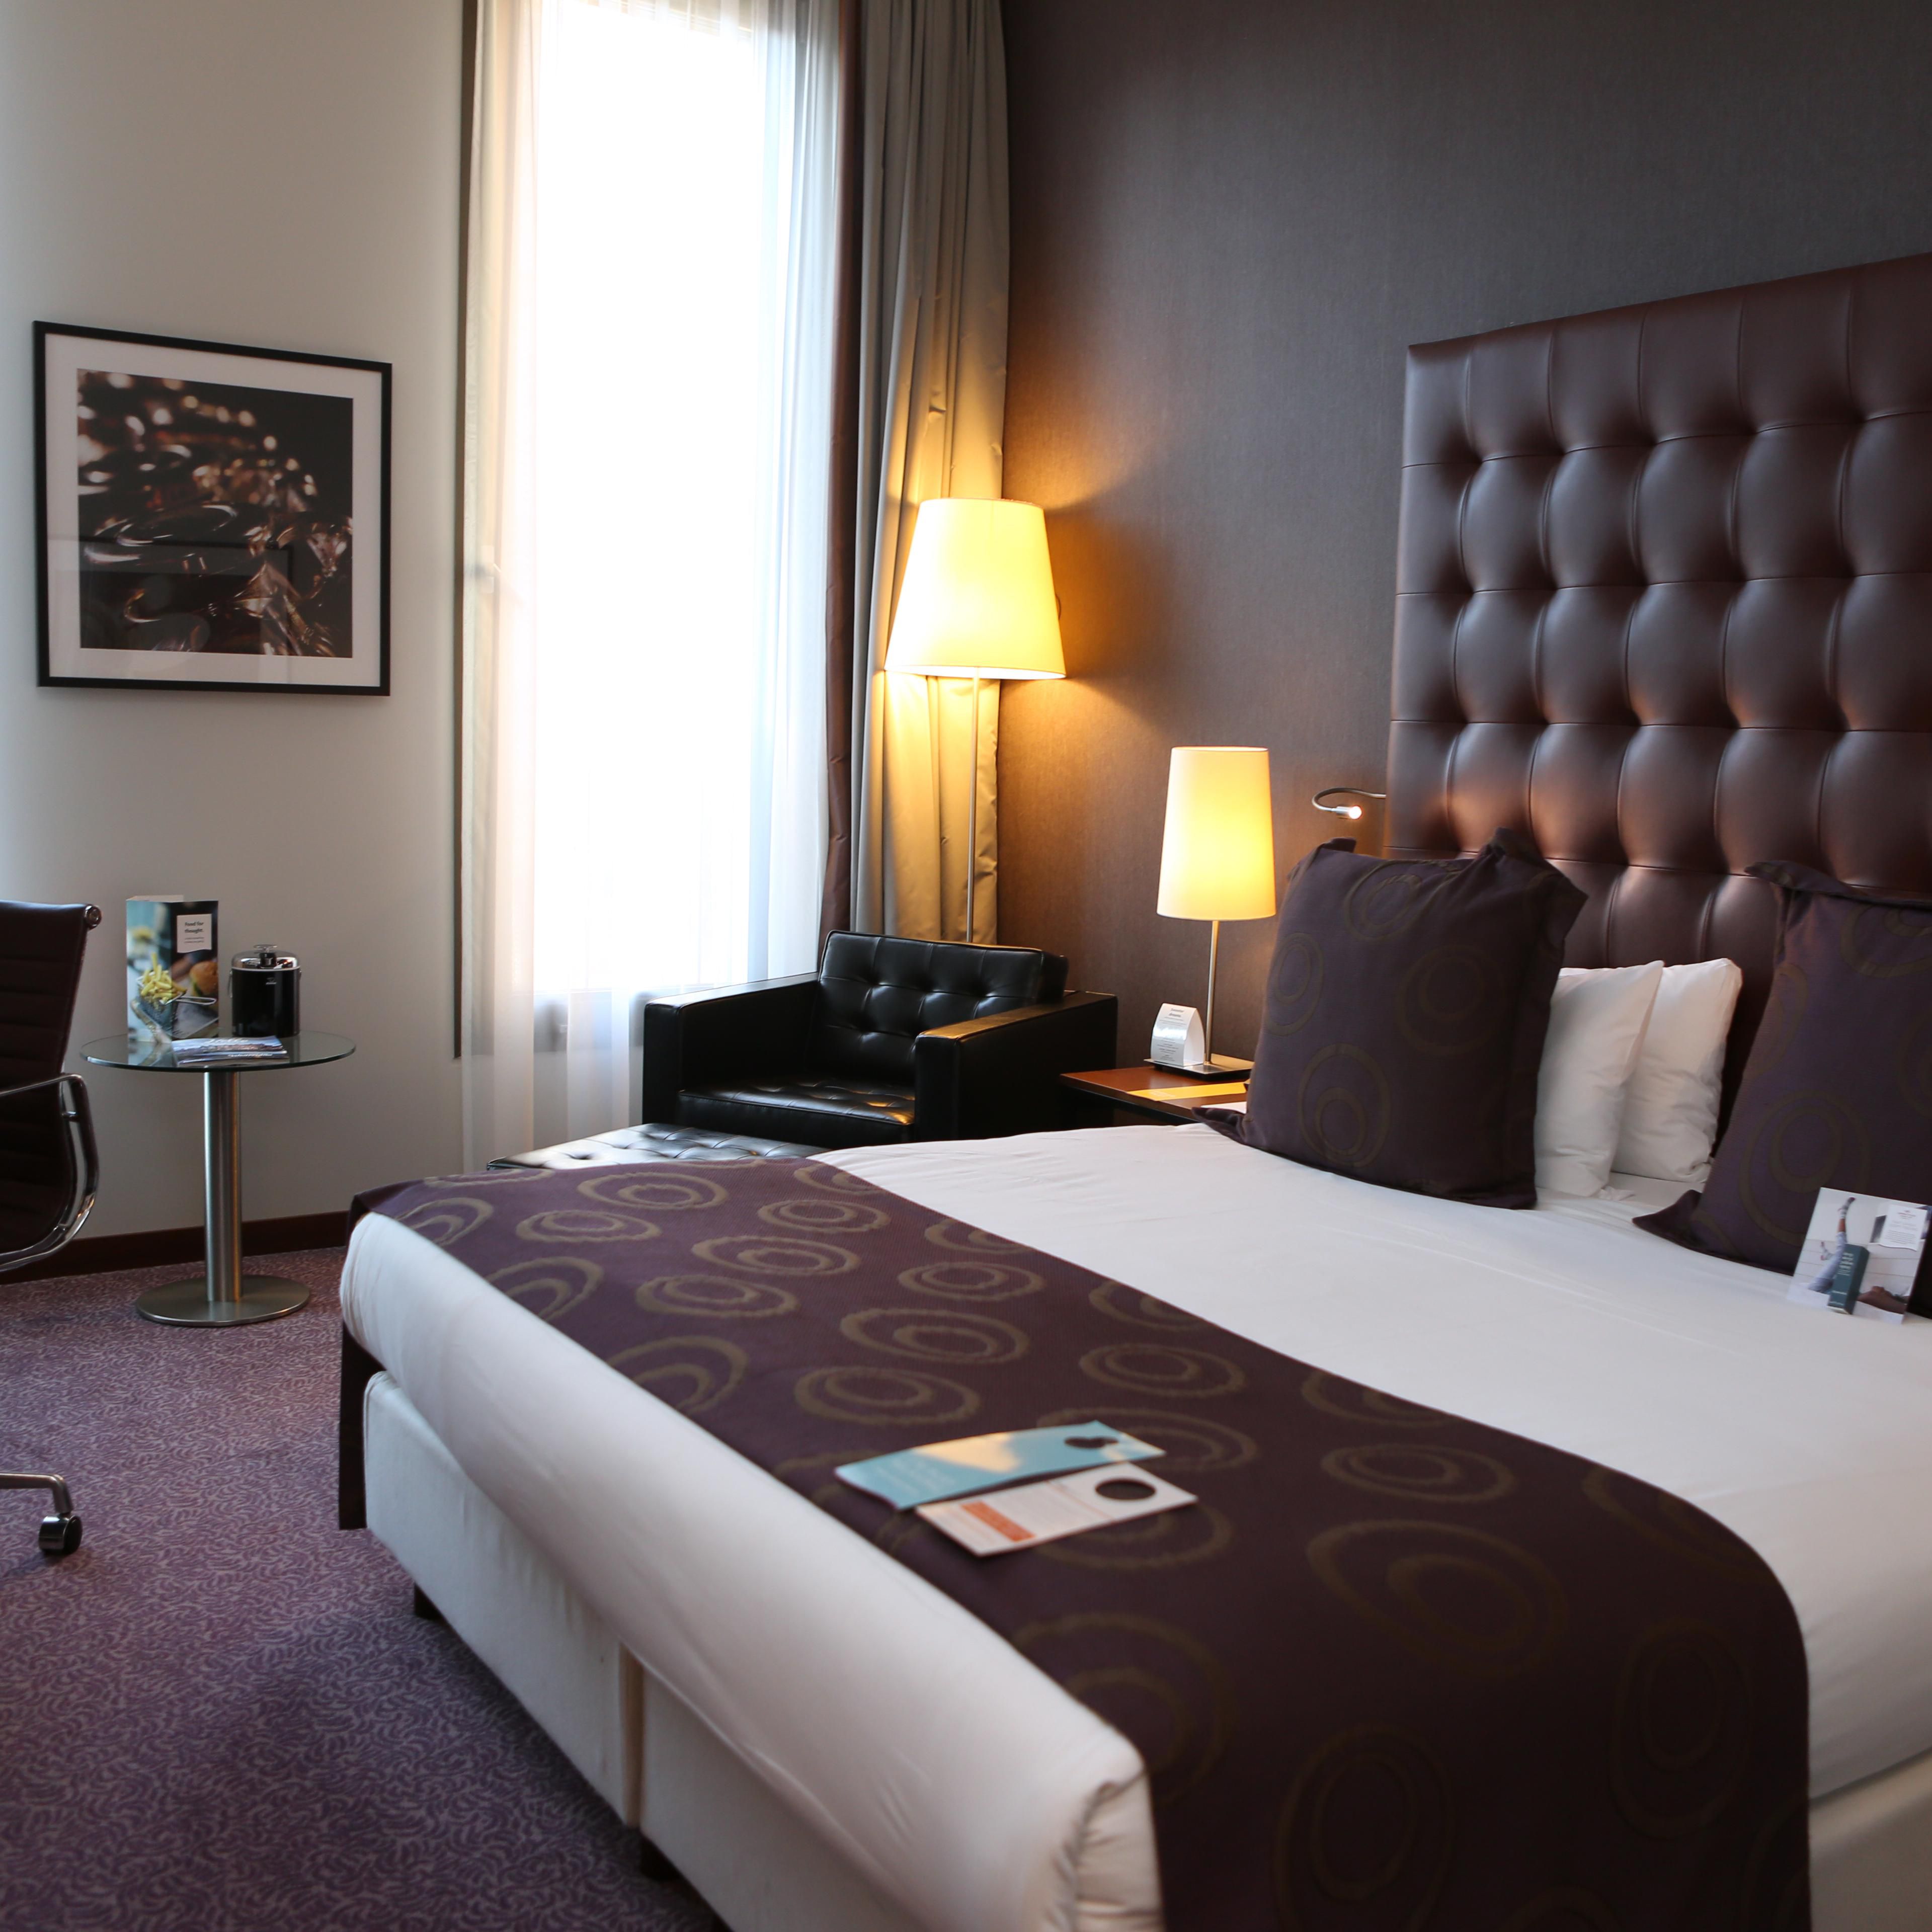 One of the luxury Club Rooms with an extra large King Size bed